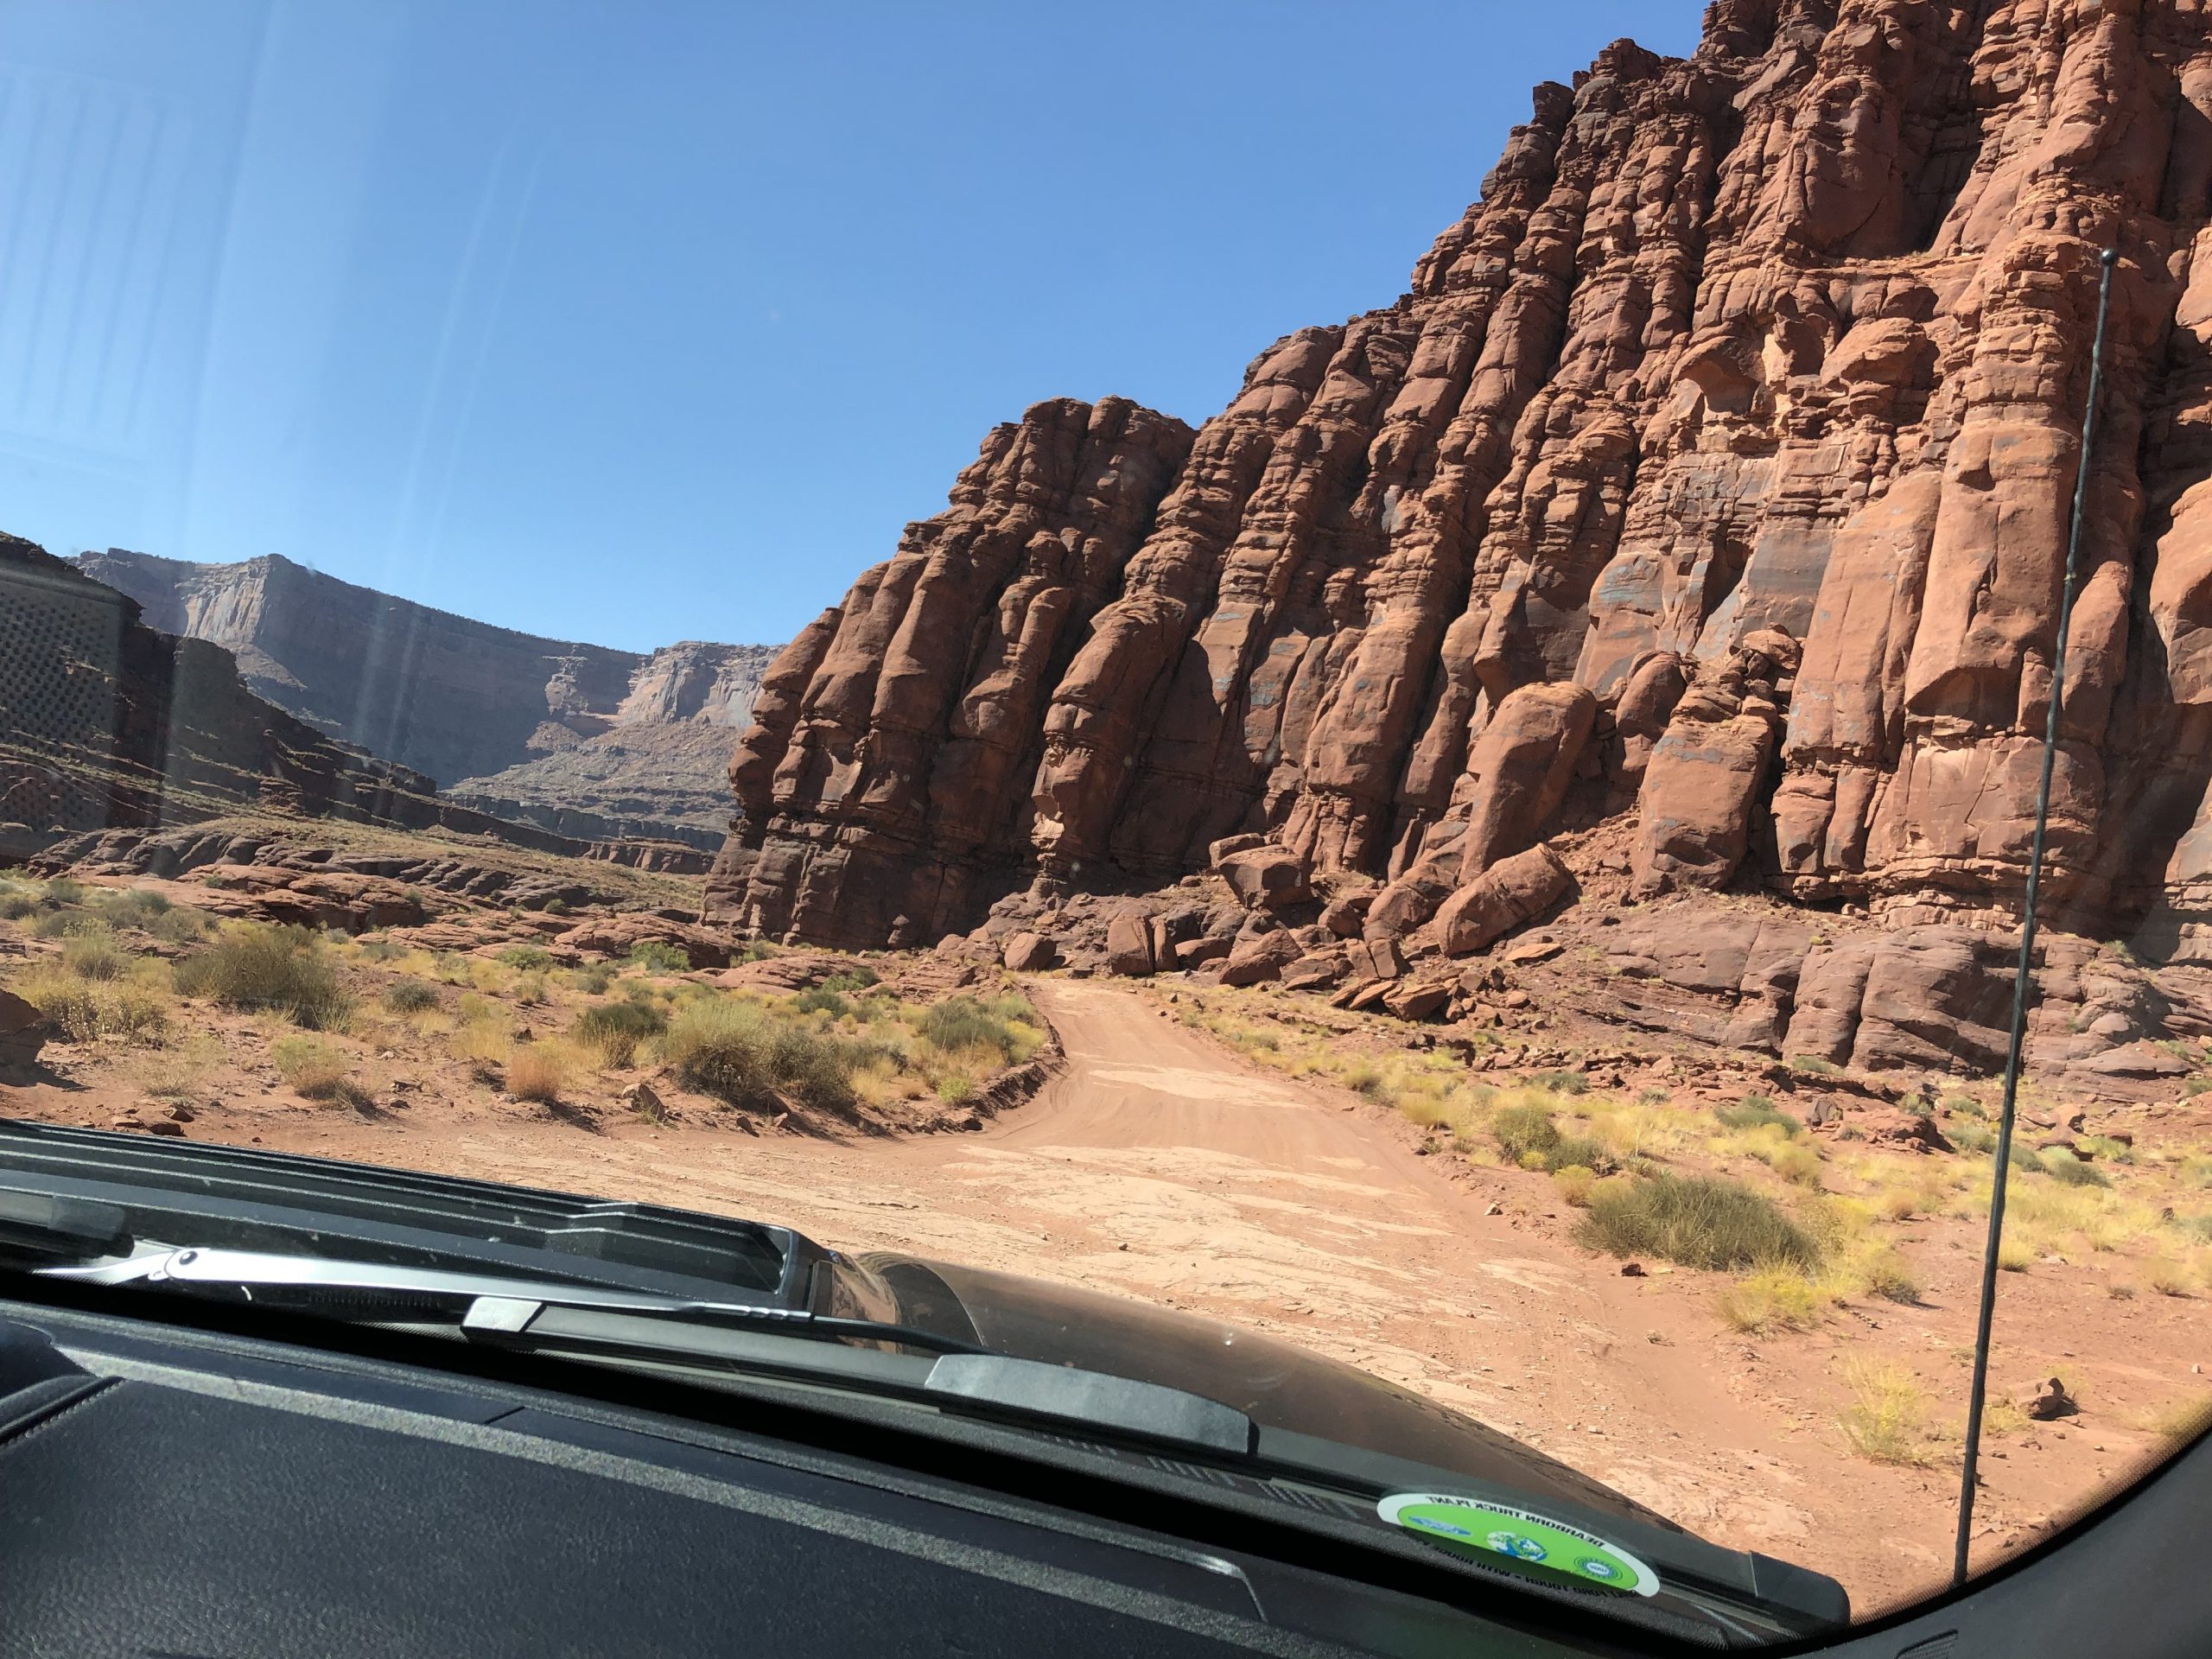 Getting Closer to Shafer Trail